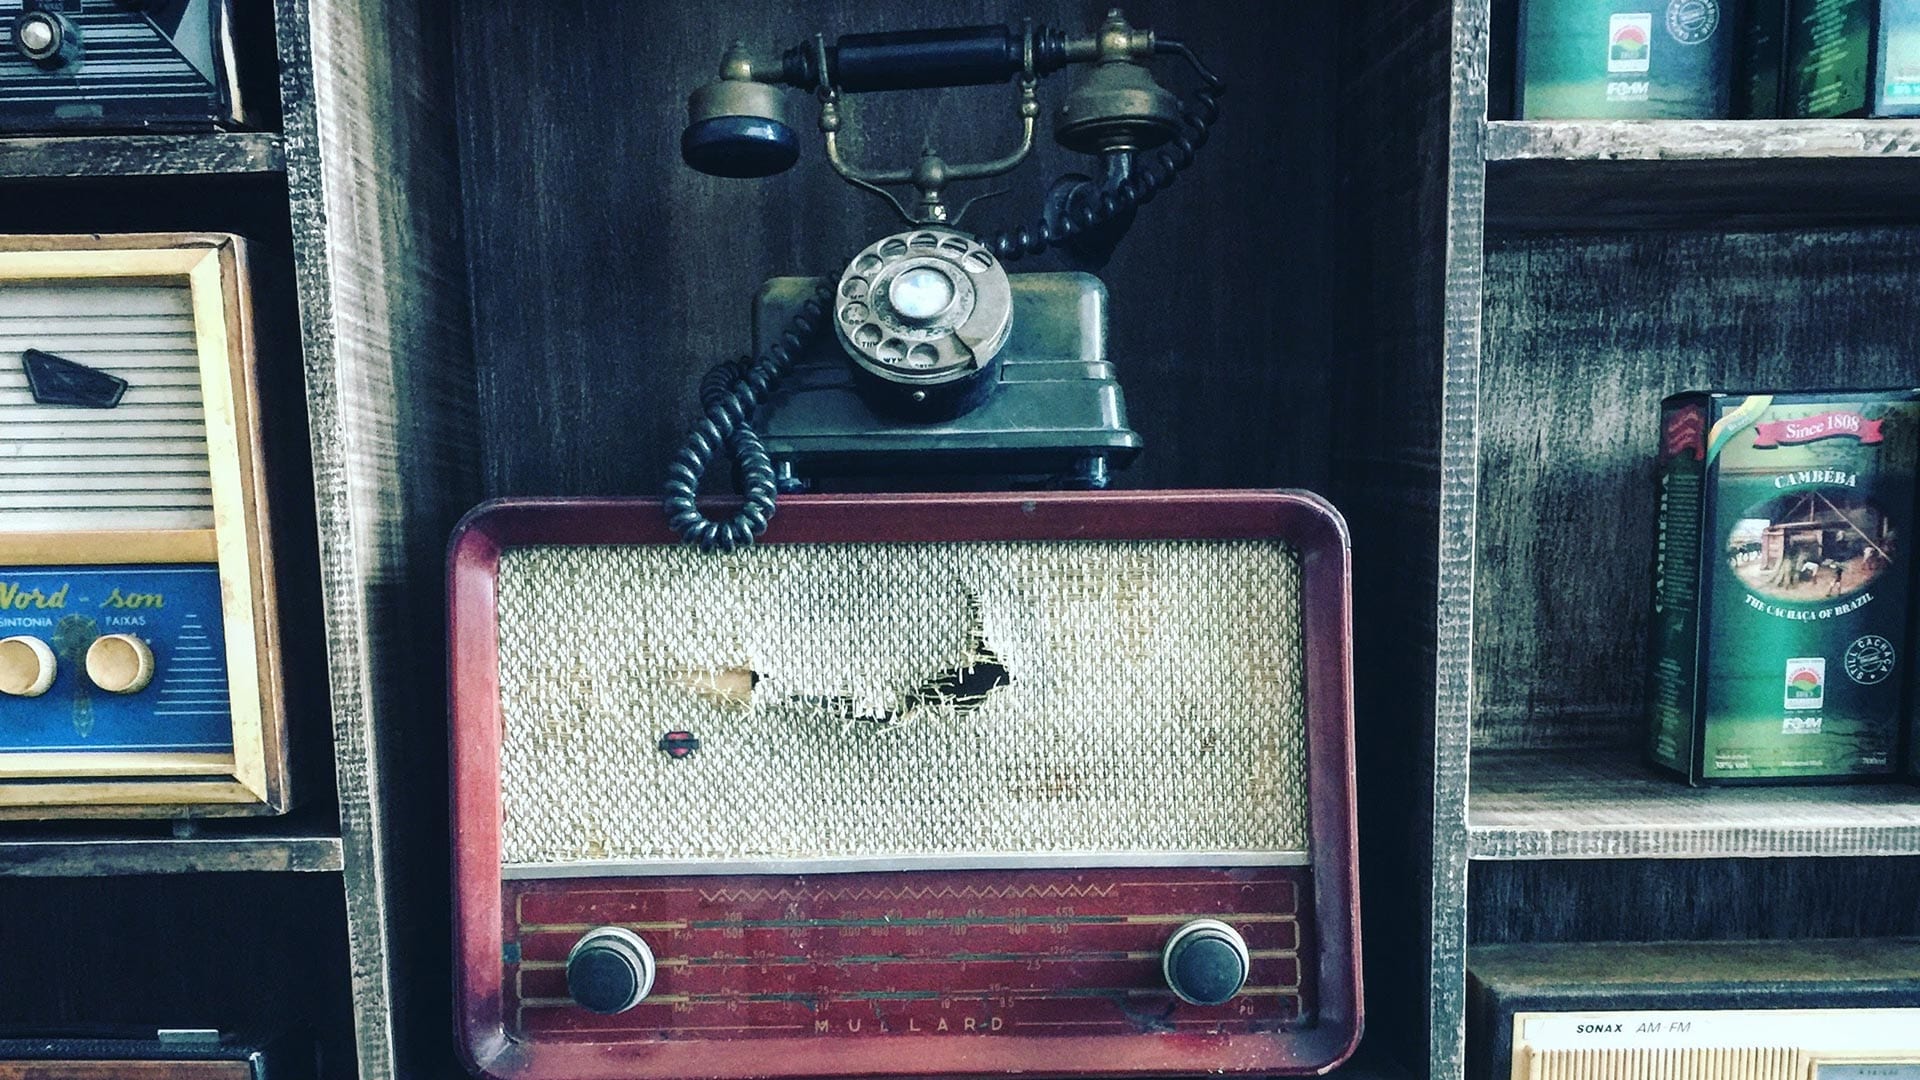 Shelving with old radios and an old telephone